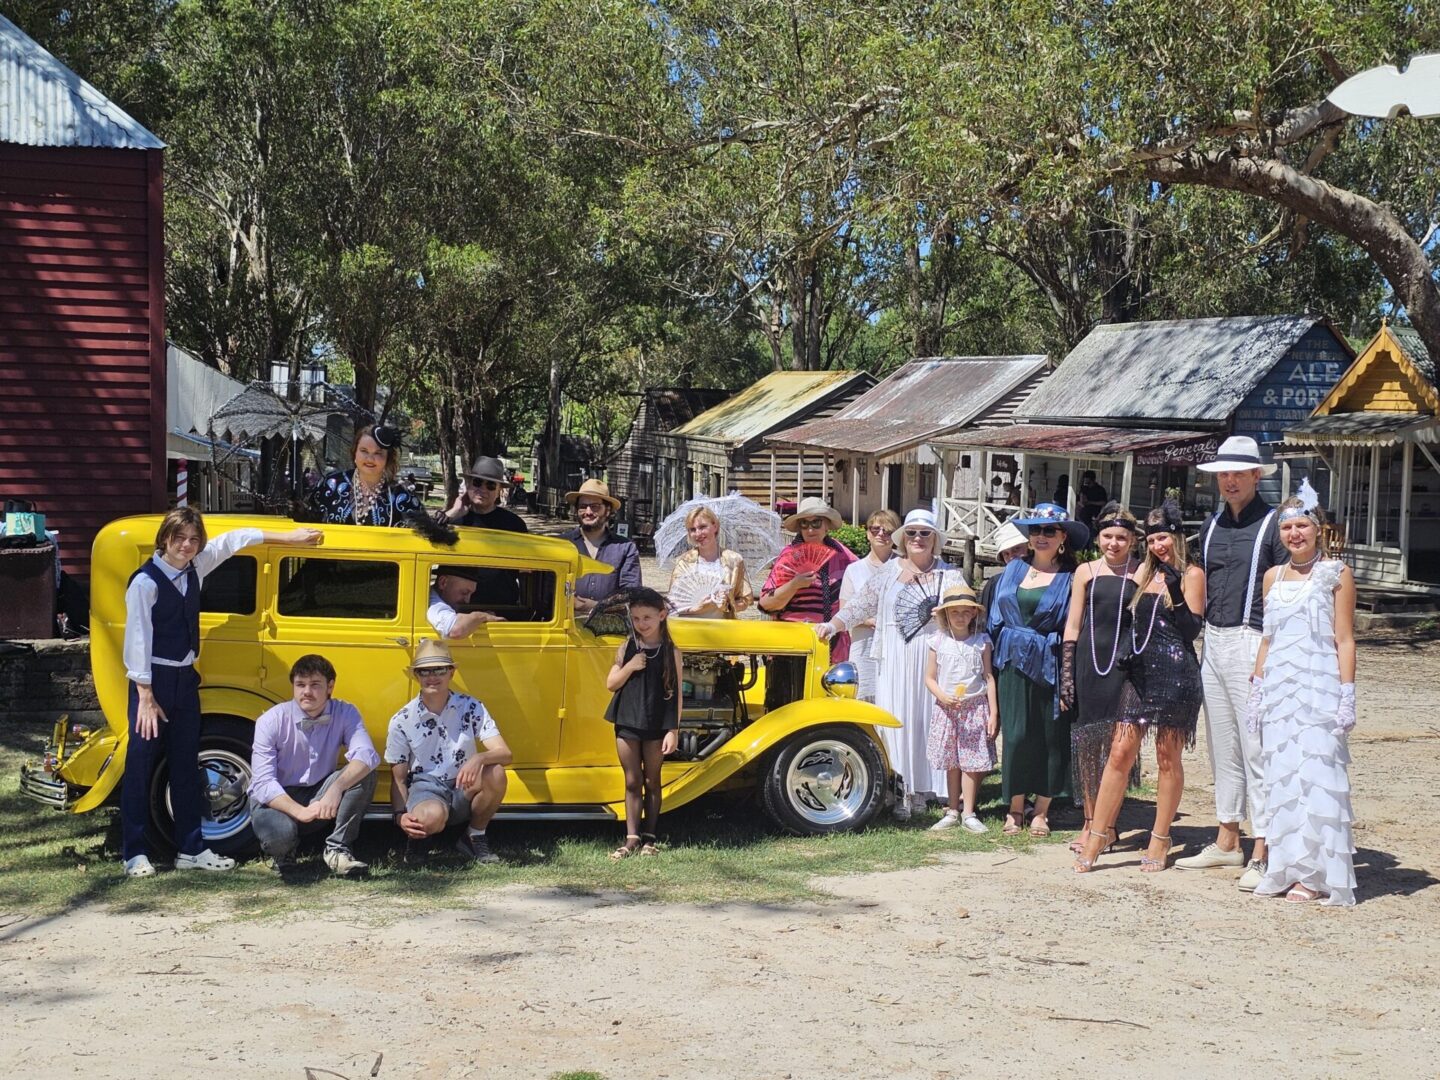 Dressed up in 1920s-style outfits for a family photo shoot with the yellow hot rod, making memories together